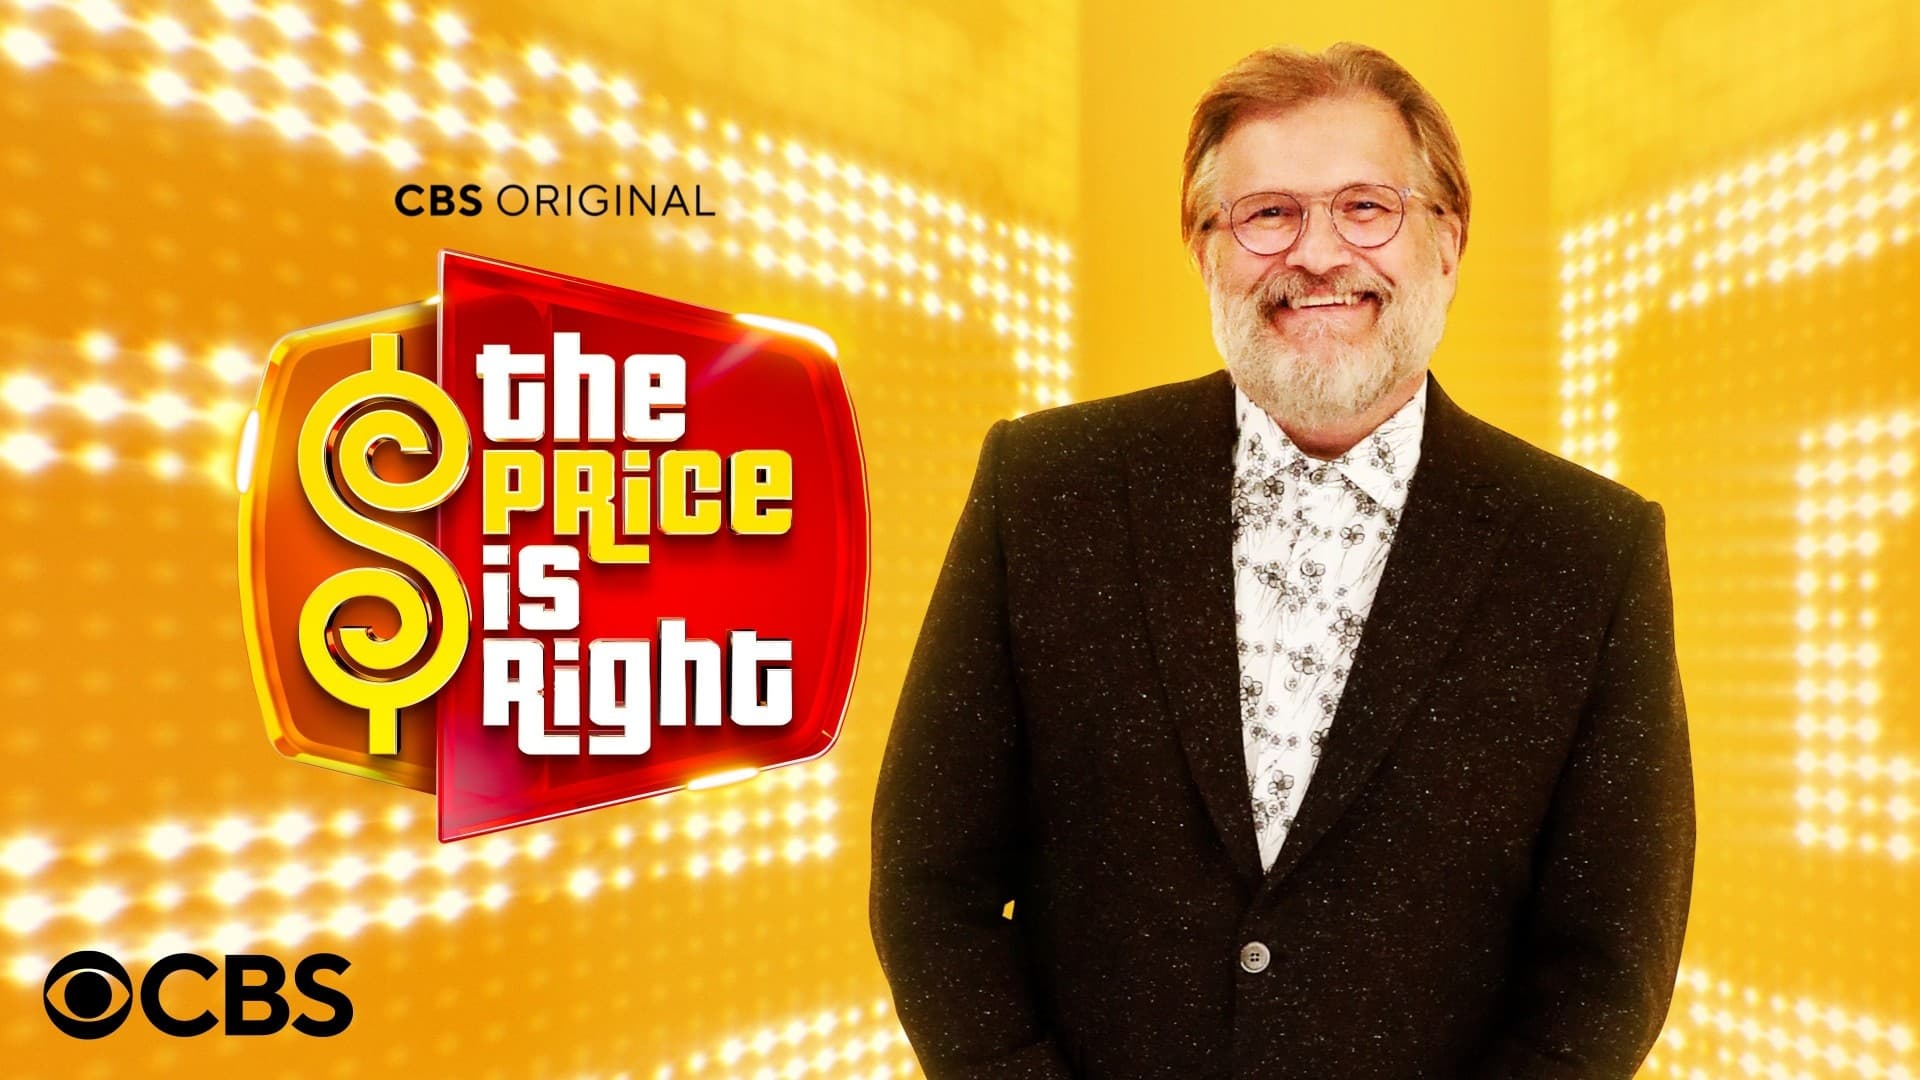 The Price Is Right - Season 1 Episode 163 : The Price Is Right Season 1 Episode 163